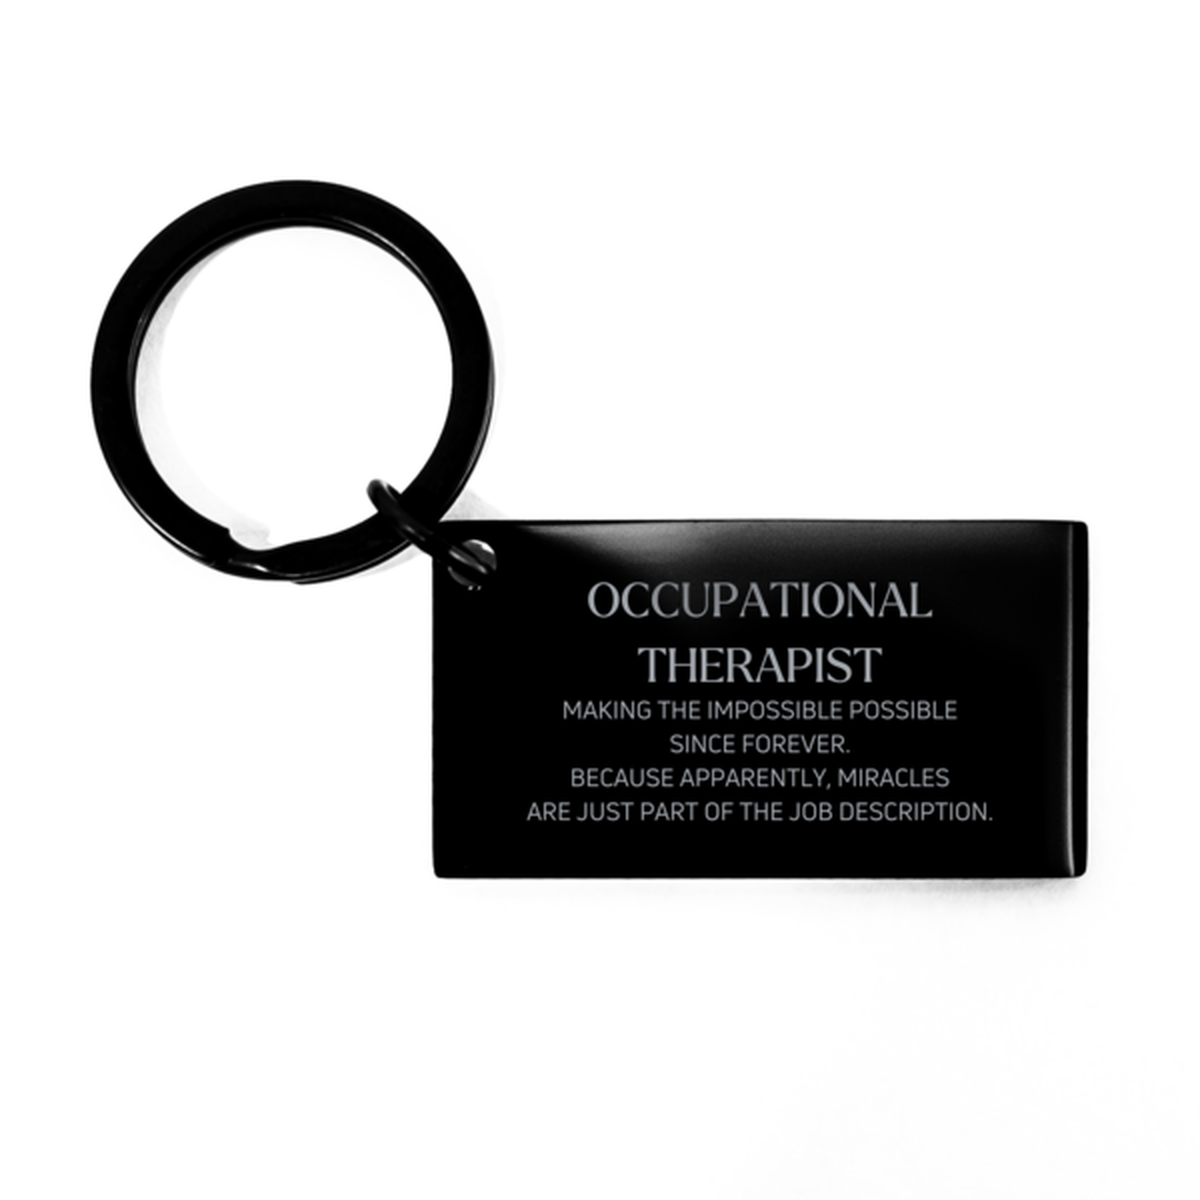 Funny Occupational Therapist Gifts, Miracles are just part of the job description, Inspirational Birthday Keychain For Occupational Therapist, Men, Women, Coworkers, Friends, Boss